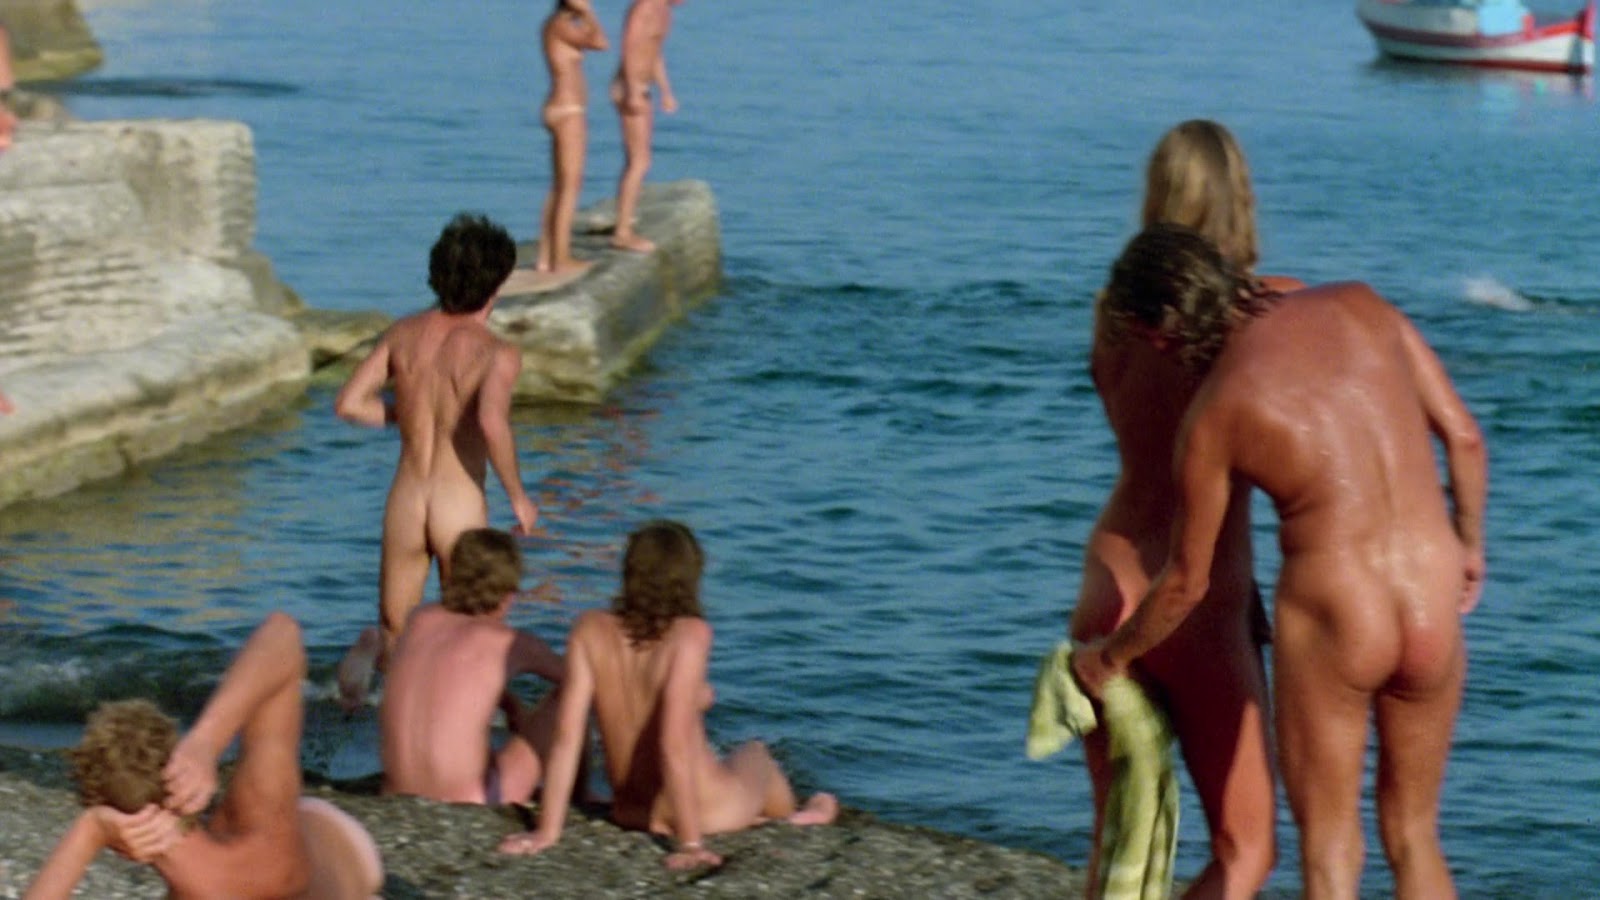 Peter Gallagher nude in Summer Lovers.